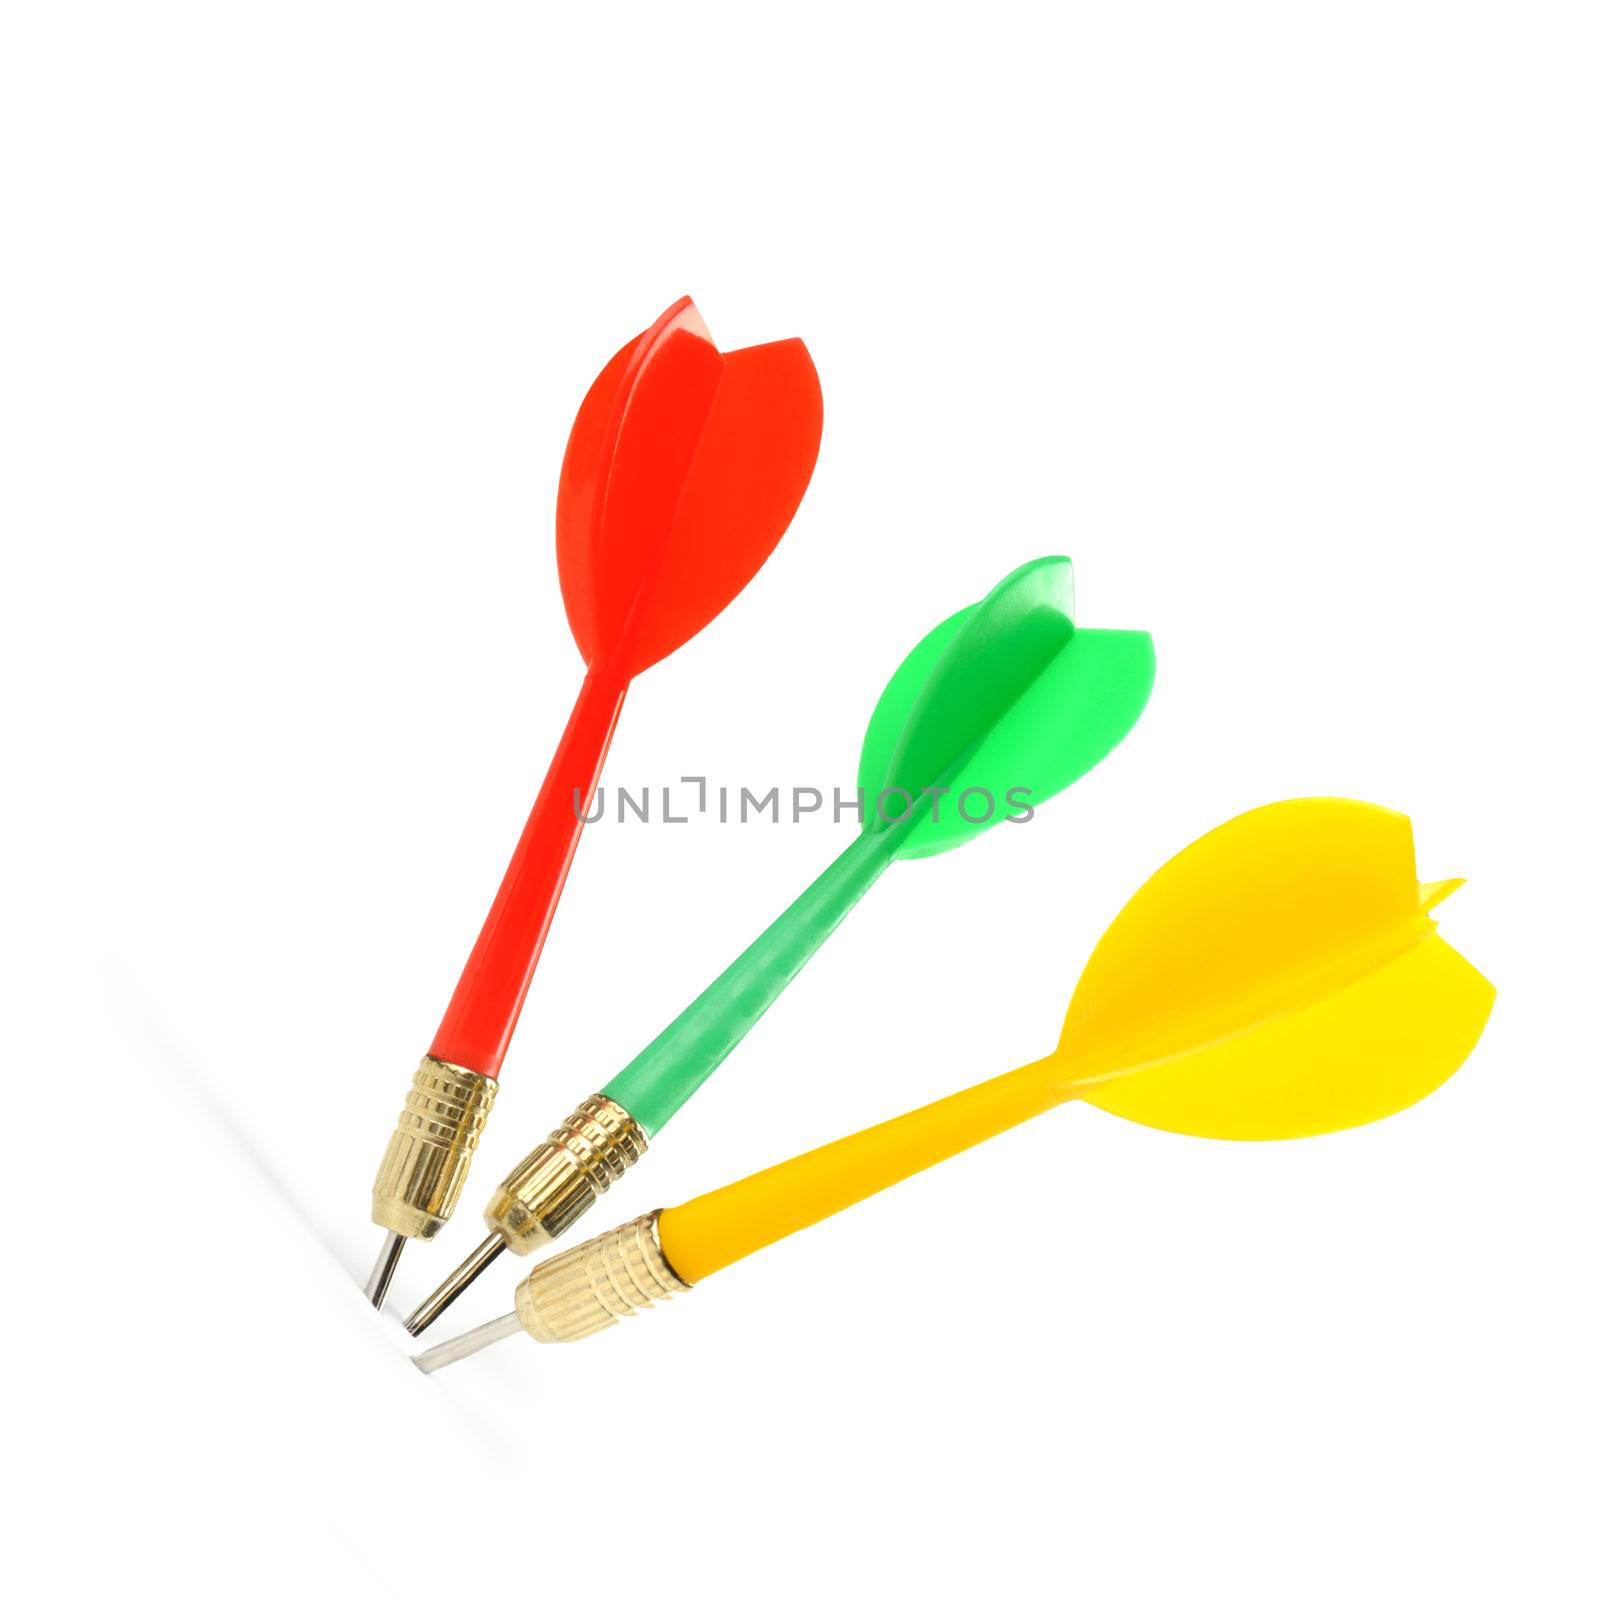 Game darts. It is isolated on a white background.